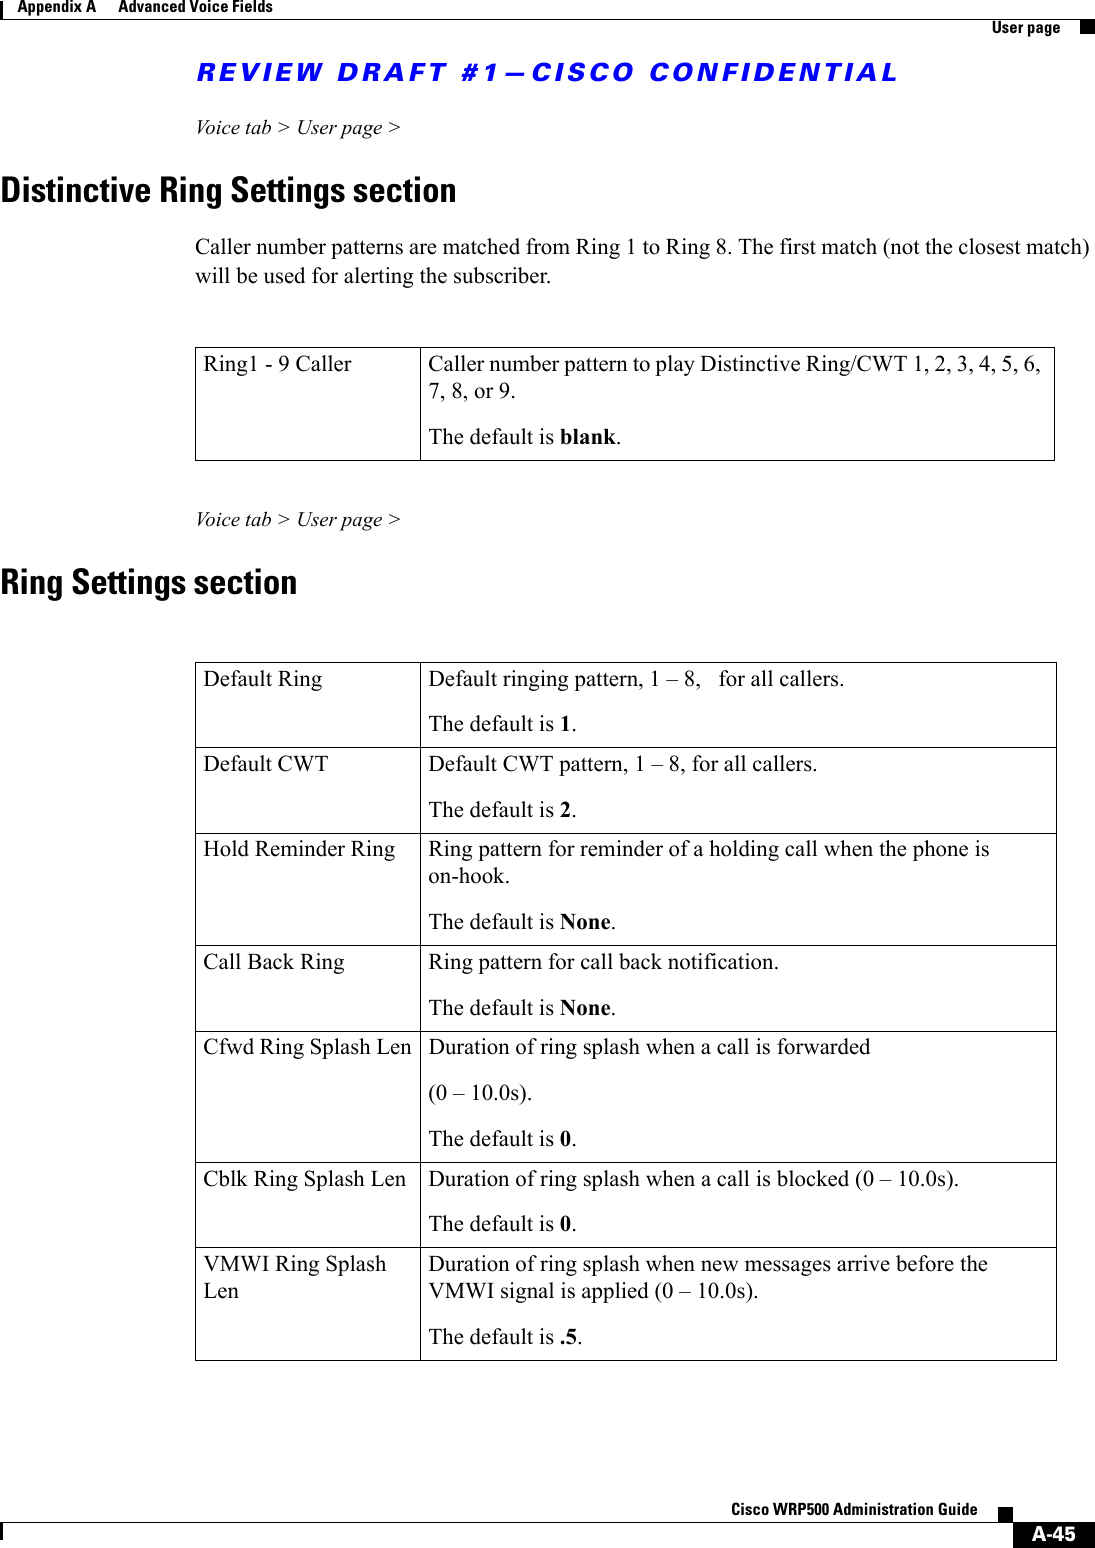 REVIEW DRAFT #1—CISCO CONFIDENTIALA-45Cisco WRP500 Administration Guide Appendix A      Advanced Voice Fields  User pageVoice tab &gt; User page &gt; Distinctive Ring Settings sectionCaller number patterns are matched from Ring 1 to Ring 8. The first match (not the closest match) will be used for alerting the subscriber.Voice tab &gt; User page &gt; Ring Settings sectionRing1 - 9 Caller Caller number pattern to play Distinctive Ring/CWT 1, 2, 3, 4, 5, 6, 7, 8, or 9.The default is blank. Default Ring Default ringing pattern, 1 – 8,   for all callers.The default is 1. Default CWT Default CWT pattern, 1 – 8, for all callers.The default is 2. Hold Reminder Ring Ring pattern for reminder of a holding call when the phone is on-hook.The default is None.Call Back Ring Ring pattern for call back notification.The default is None.Cfwd Ring Splash Len Duration of ring splash when a call is forwarded(0 – 10.0s).The default is 0. Cblk Ring Splash Len Duration of ring splash when a call is blocked (0 – 10.0s).The default is 0. VMWI Ring Splash LenDuration of ring splash when new messages arrive before the VMWI signal is applied (0 – 10.0s).The default is .5. 